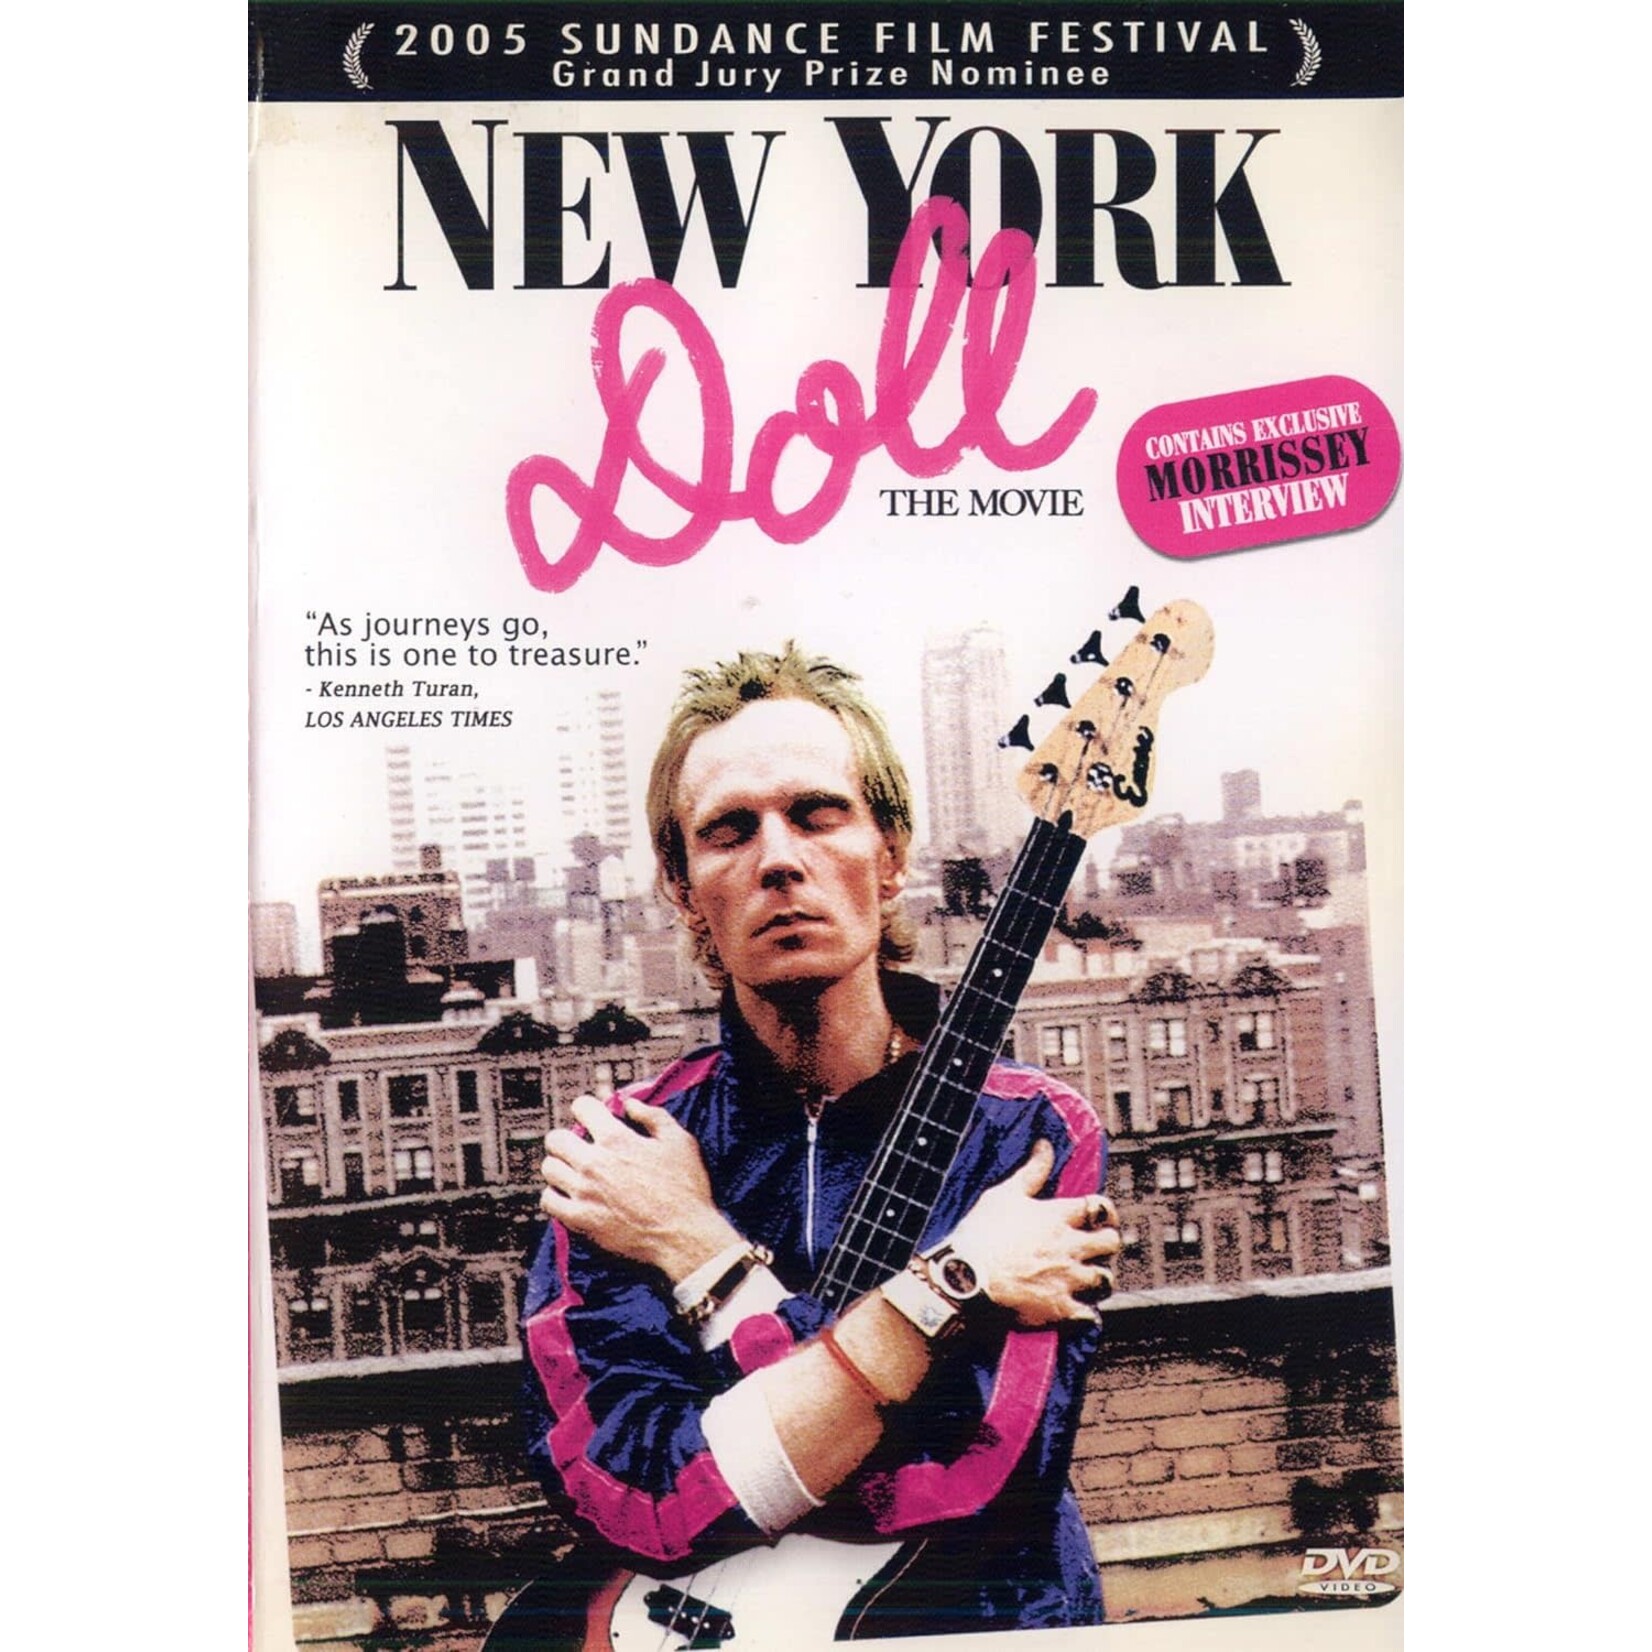 New York Doll: The Movie (2005) [USED DVD]